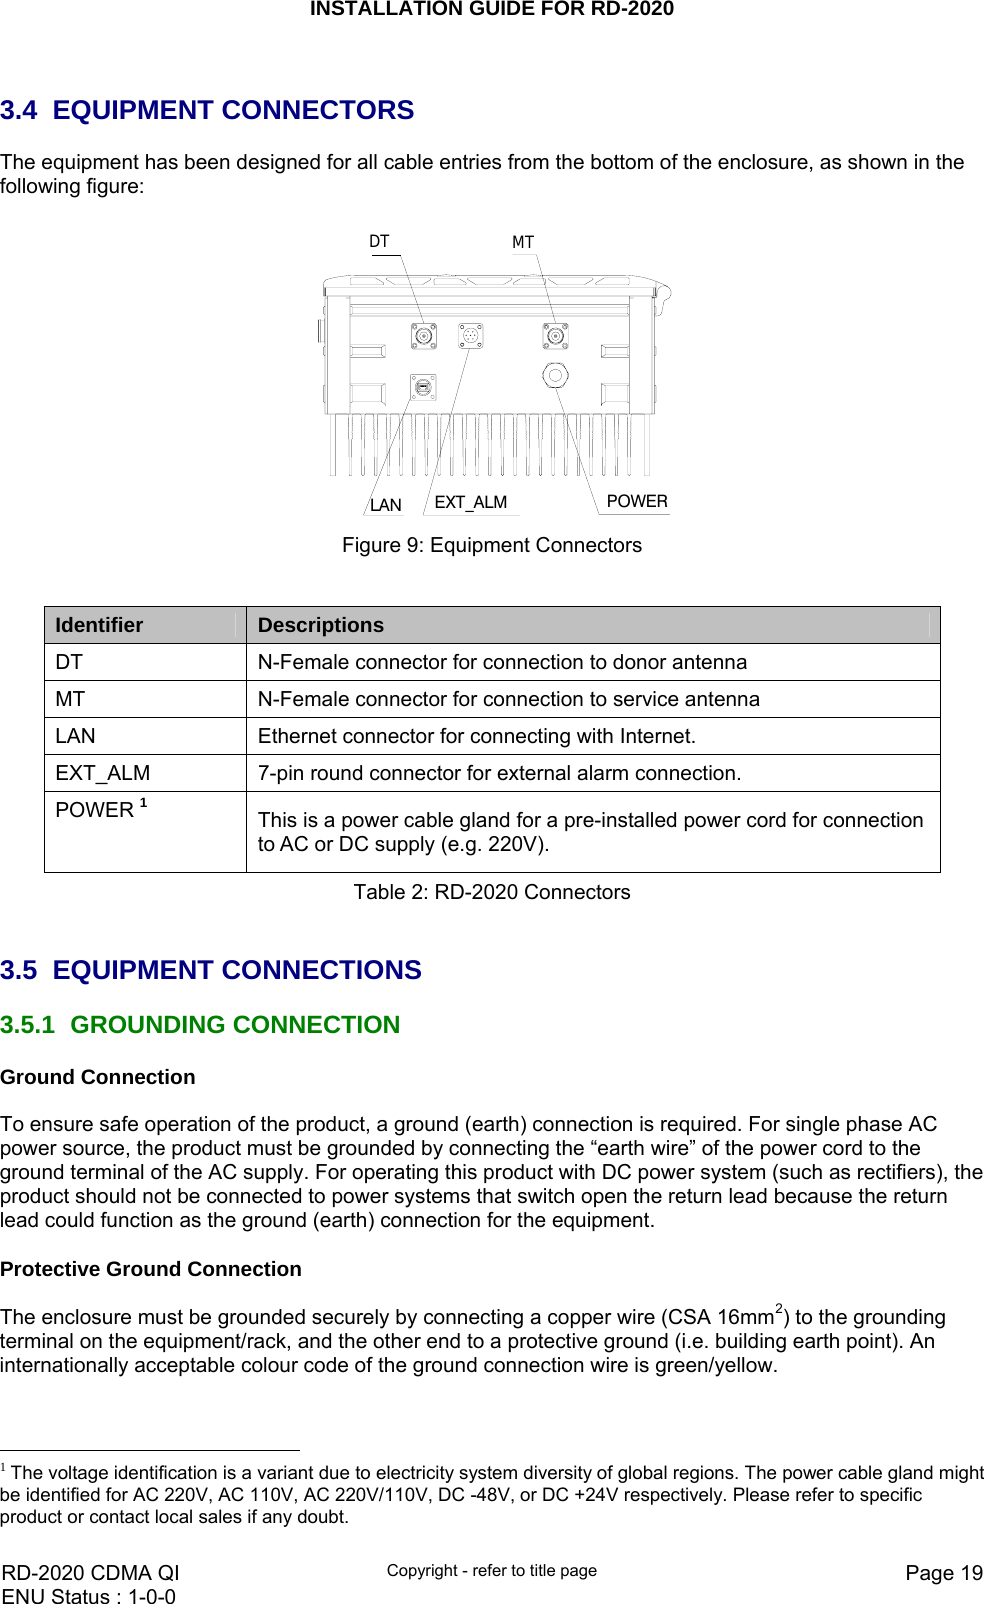 INSTALLATION GUIDE FOR RD-2020    RD-2020 CDMA QI  Copyright - refer to title page  Page 19ENU Status : 1-0-0     3.4 EQUIPMENT CONNECTORS The equipment has been designed for all cable entries from the bottom of the enclosure, as shown in the following figure:   LAN POWERDT MTEXT_ALM Figure 9: Equipment Connectors   Identifier  Descriptions DT  N-Female connector for connection to donor antenna MT  N-Female connector for connection to service antenna LAN  Ethernet connector for connecting with Internet. EXT_ALM  7-pin round connector for external alarm connection. POWER 1 This is a power cable gland for a pre-installed power cord for connection to AC or DC supply (e.g. 220V). Table 2: RD-2020 Connectors   3.5 EQUIPMENT CONNECTIONS 3.5.1 GROUNDING CONNECTION Ground Connection  To ensure safe operation of the product, a ground (earth) connection is required. For single phase AC power source, the product must be grounded by connecting the “earth wire” of the power cord to the ground terminal of the AC supply. For operating this product with DC power system (such as rectifiers), the product should not be connected to power systems that switch open the return lead because the return lead could function as the ground (earth) connection for the equipment.   Protective Ground Connection  The enclosure must be grounded securely by connecting a copper wire (CSA 16mm2) to the grounding terminal on the equipment/rack, and the other end to a protective ground (i.e. building earth point). An internationally acceptable colour code of the ground connection wire is green/yellow.                                                    1 The voltage identification is a variant due to electricity system diversity of global regions. The power cable gland might be identified for AC 220V, AC 110V, AC 220V/110V, DC -48V, or DC +24V respectively. Please refer to specific product or contact local sales if any doubt. 